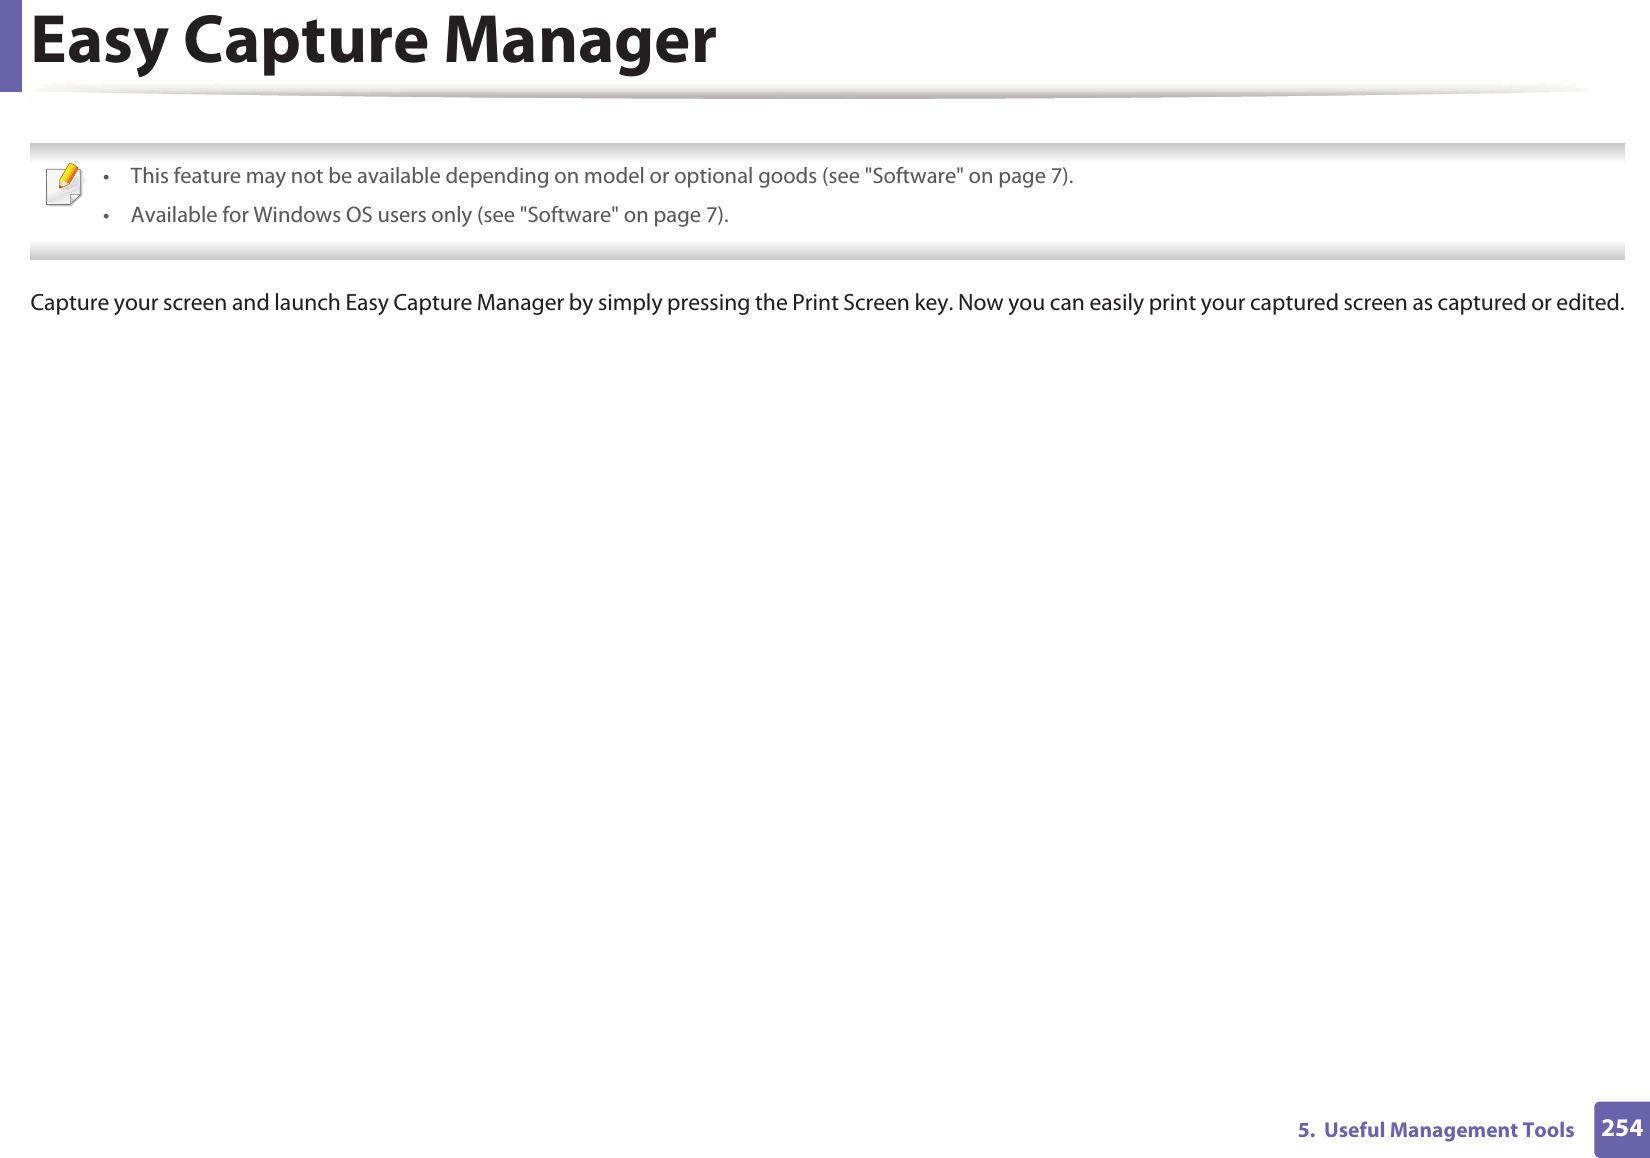 2545.  Useful Management ToolsEasy Capture Manager • This feature may not be available depending on model or optional goods (see &quot;Software&quot; on page 7).• Available for Windows OS users only (see &quot;Software&quot; on page 7). Capture your screen and launch Easy Capture Manager by simply pressing the Print Screen key. Now you can easily print your captured screen as captured or edited.